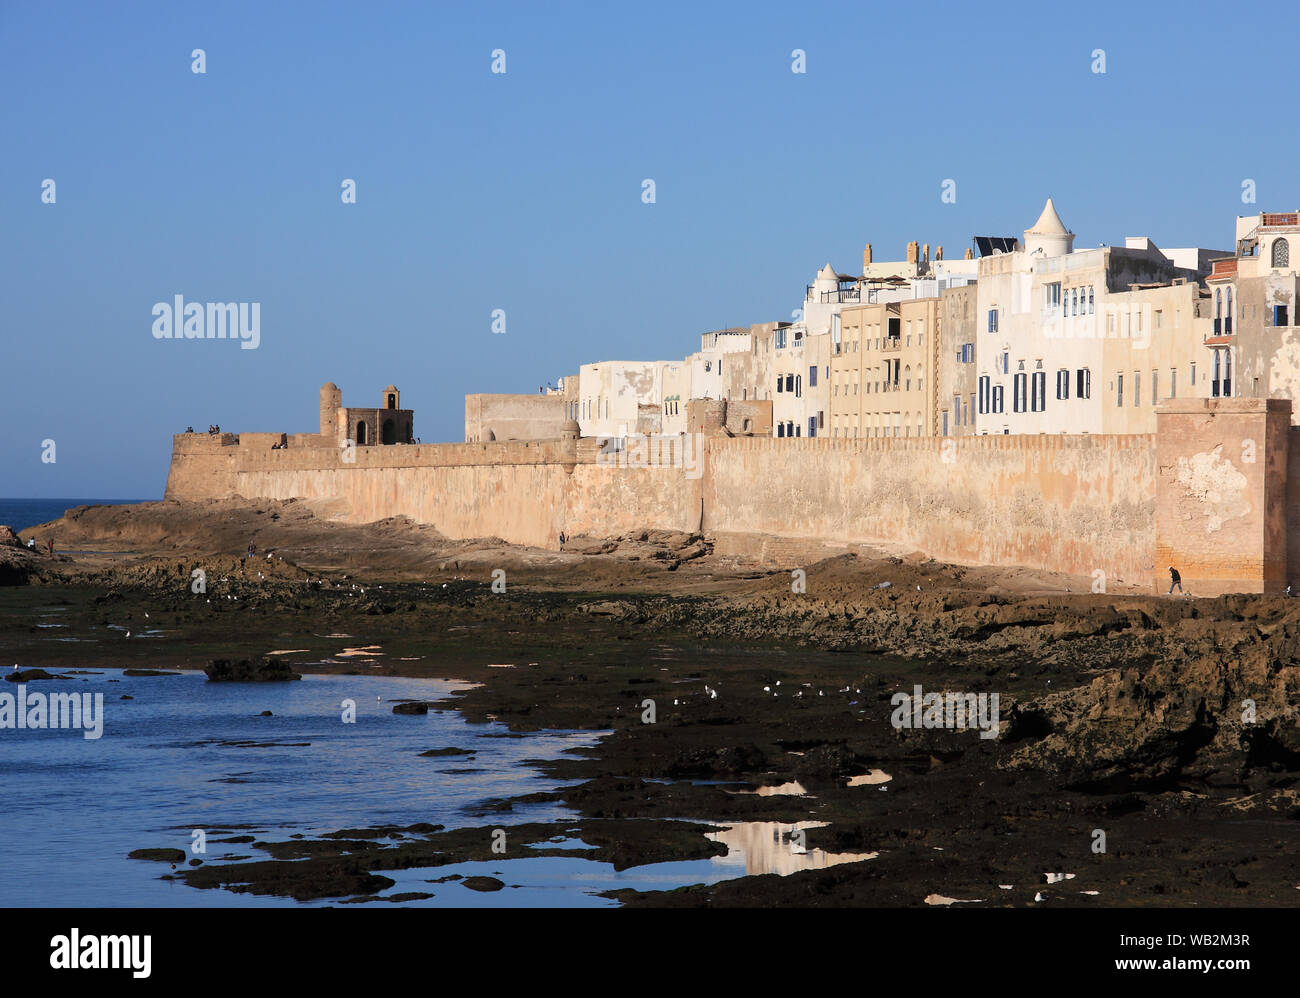 Morocco, Essaouira. Panoramic view of the old Kasbah and sea wall viewed from the Skala guarding the historical port - UNESCO World Heritage Site Stock Photo